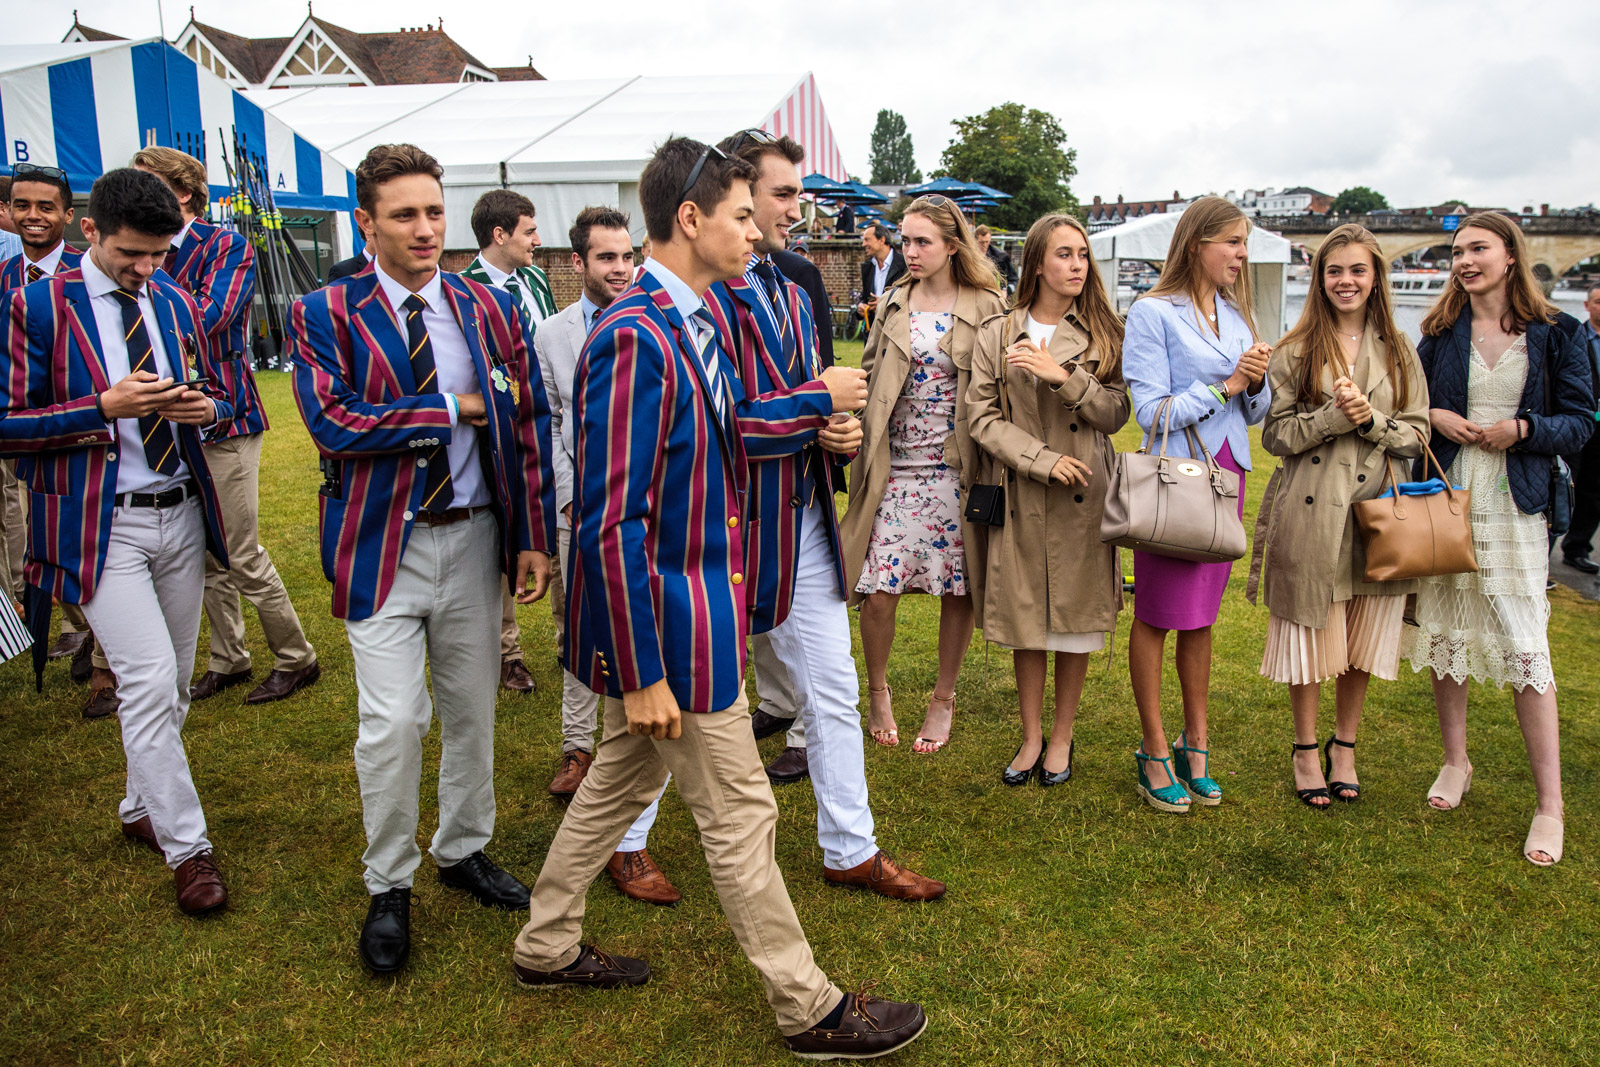  Spectators gather along the bank of the River Thames at the Henley Royal Regatta on June 28, 2017 in Henley-on-Thames. 